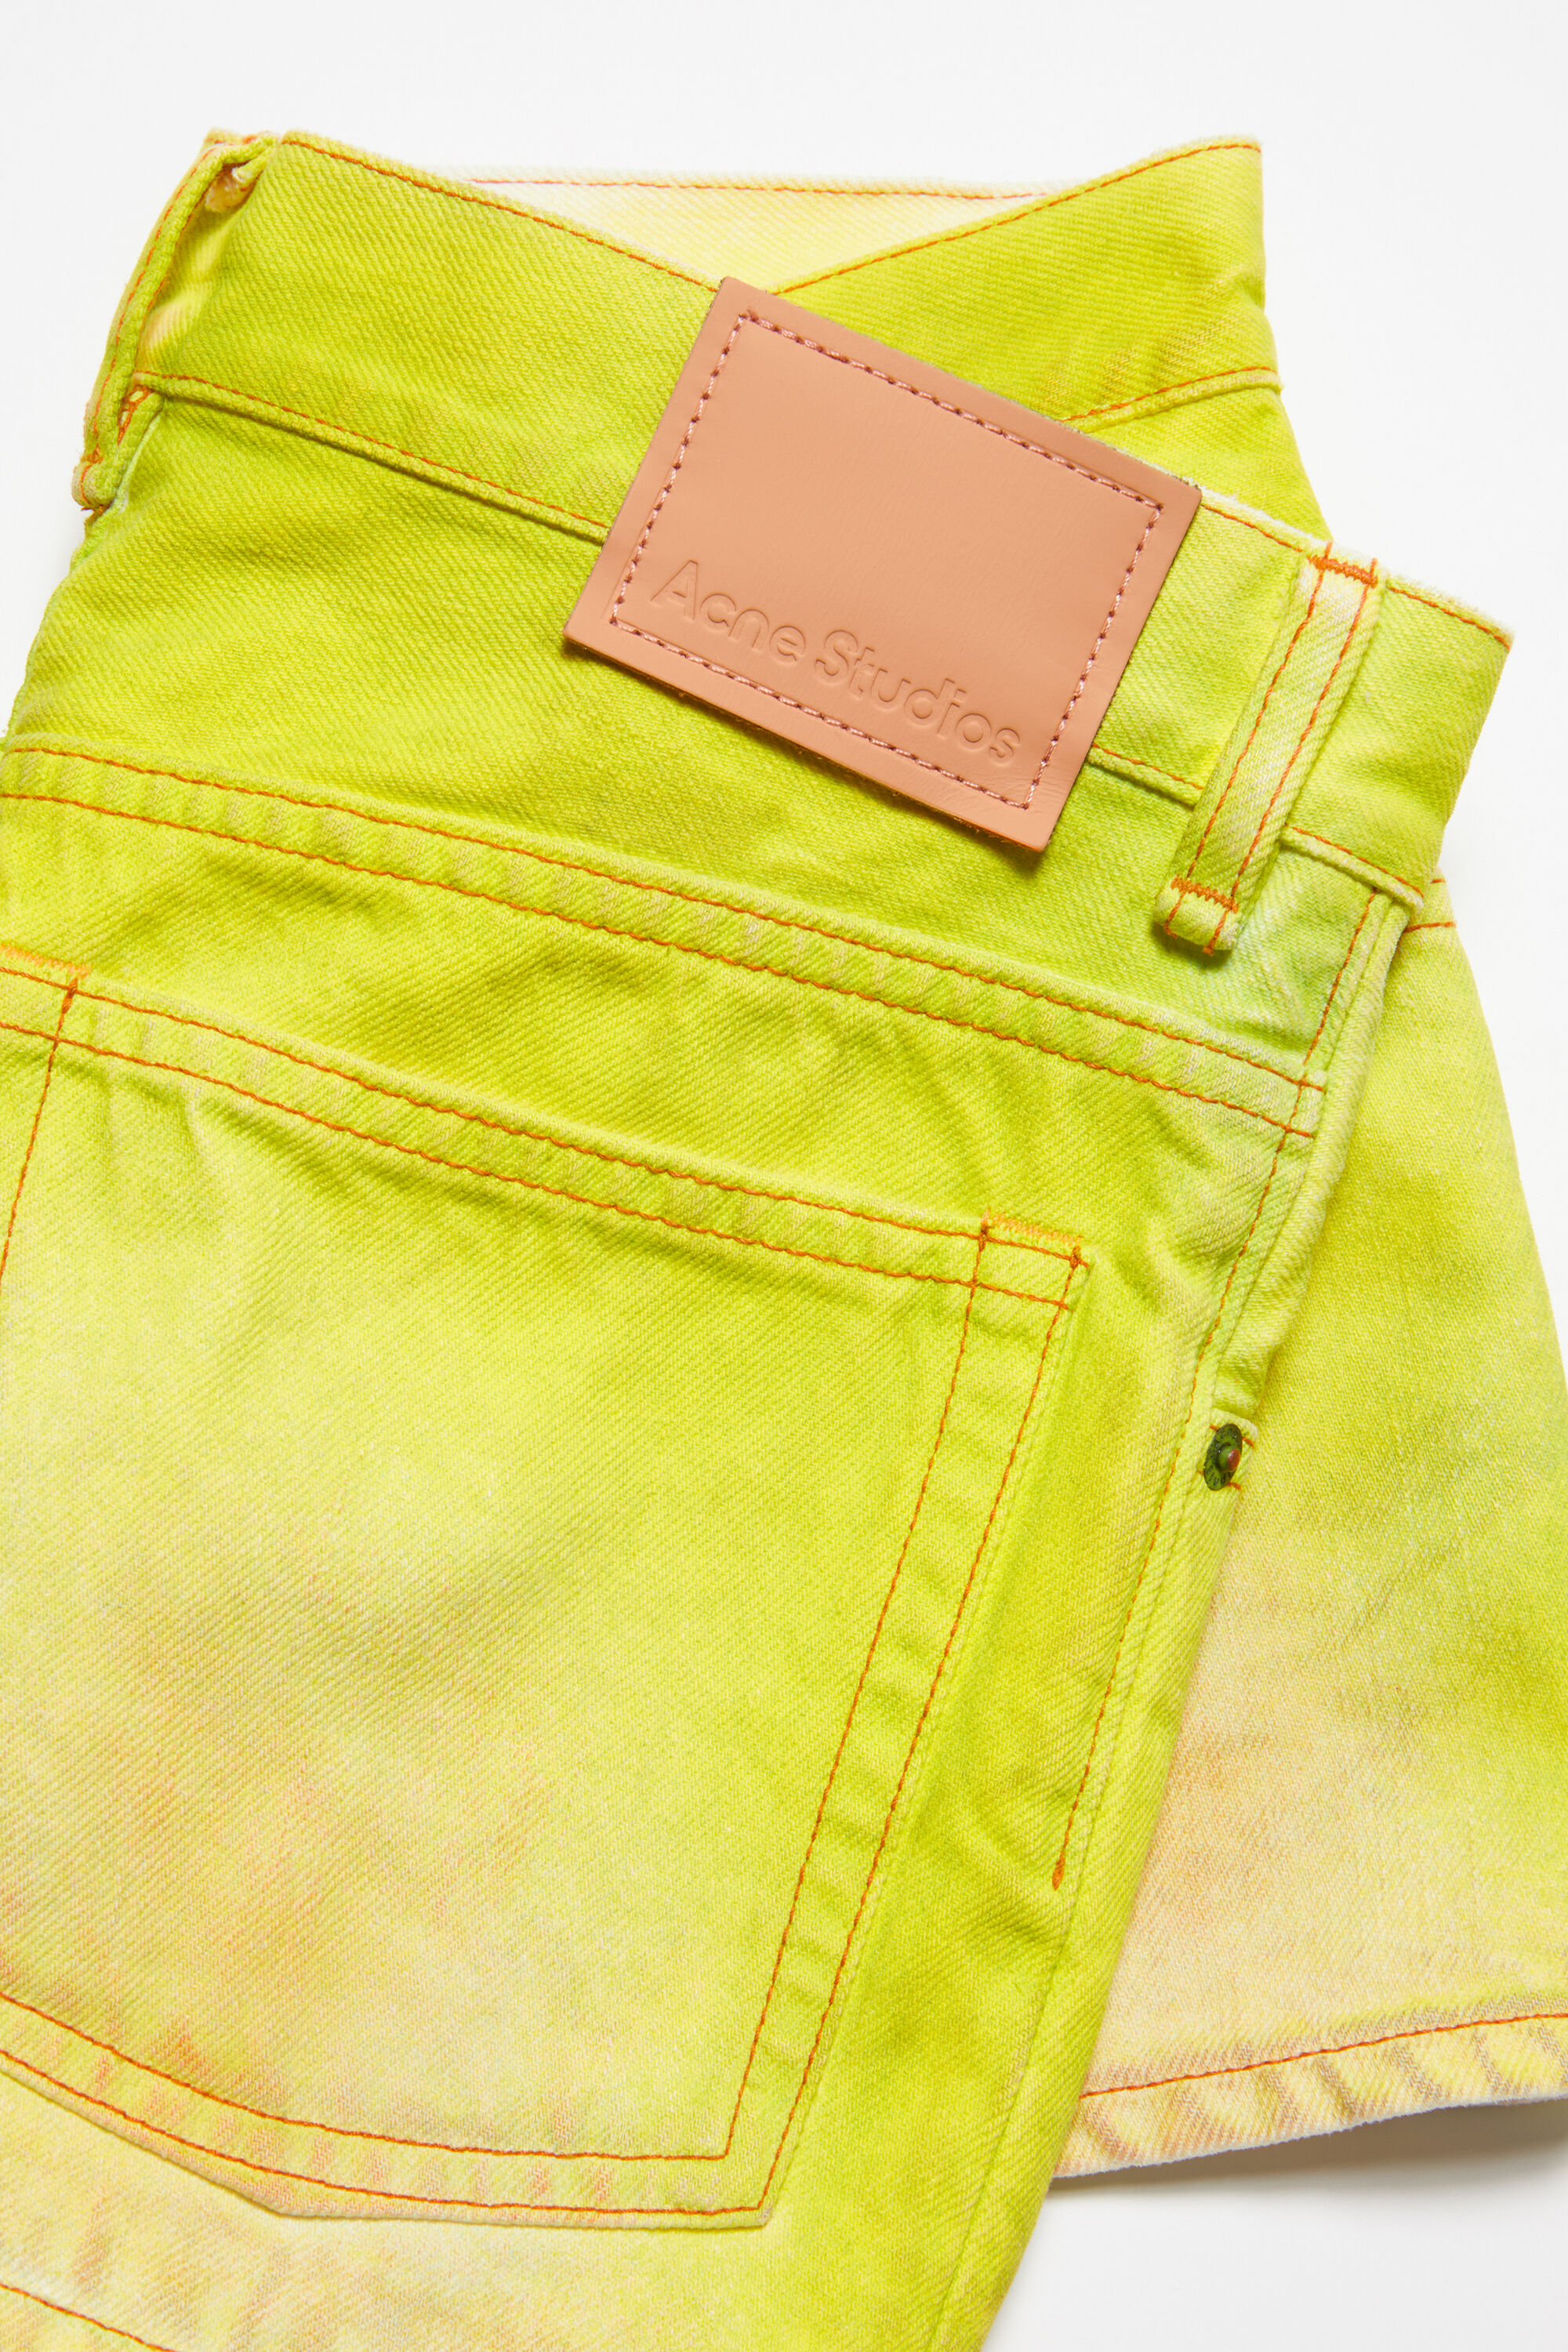 Skirts | Cyrillus Girls Girl's Jeans Skirt Yellow Medium Solid — Chico Spans